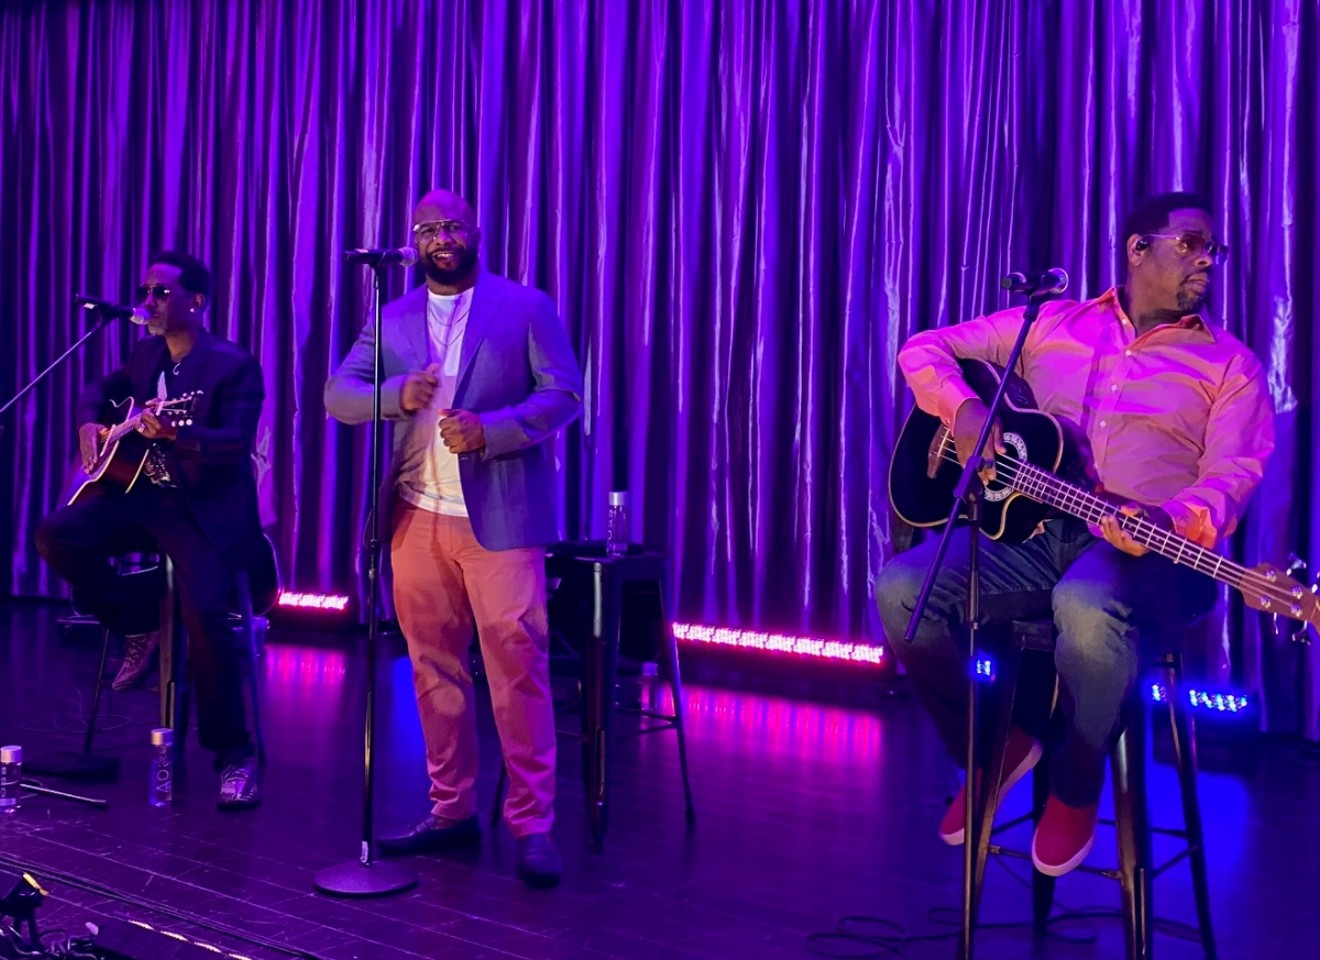 Boys II Men performed at the Fontainebleau Miami Beach during their wine launch.